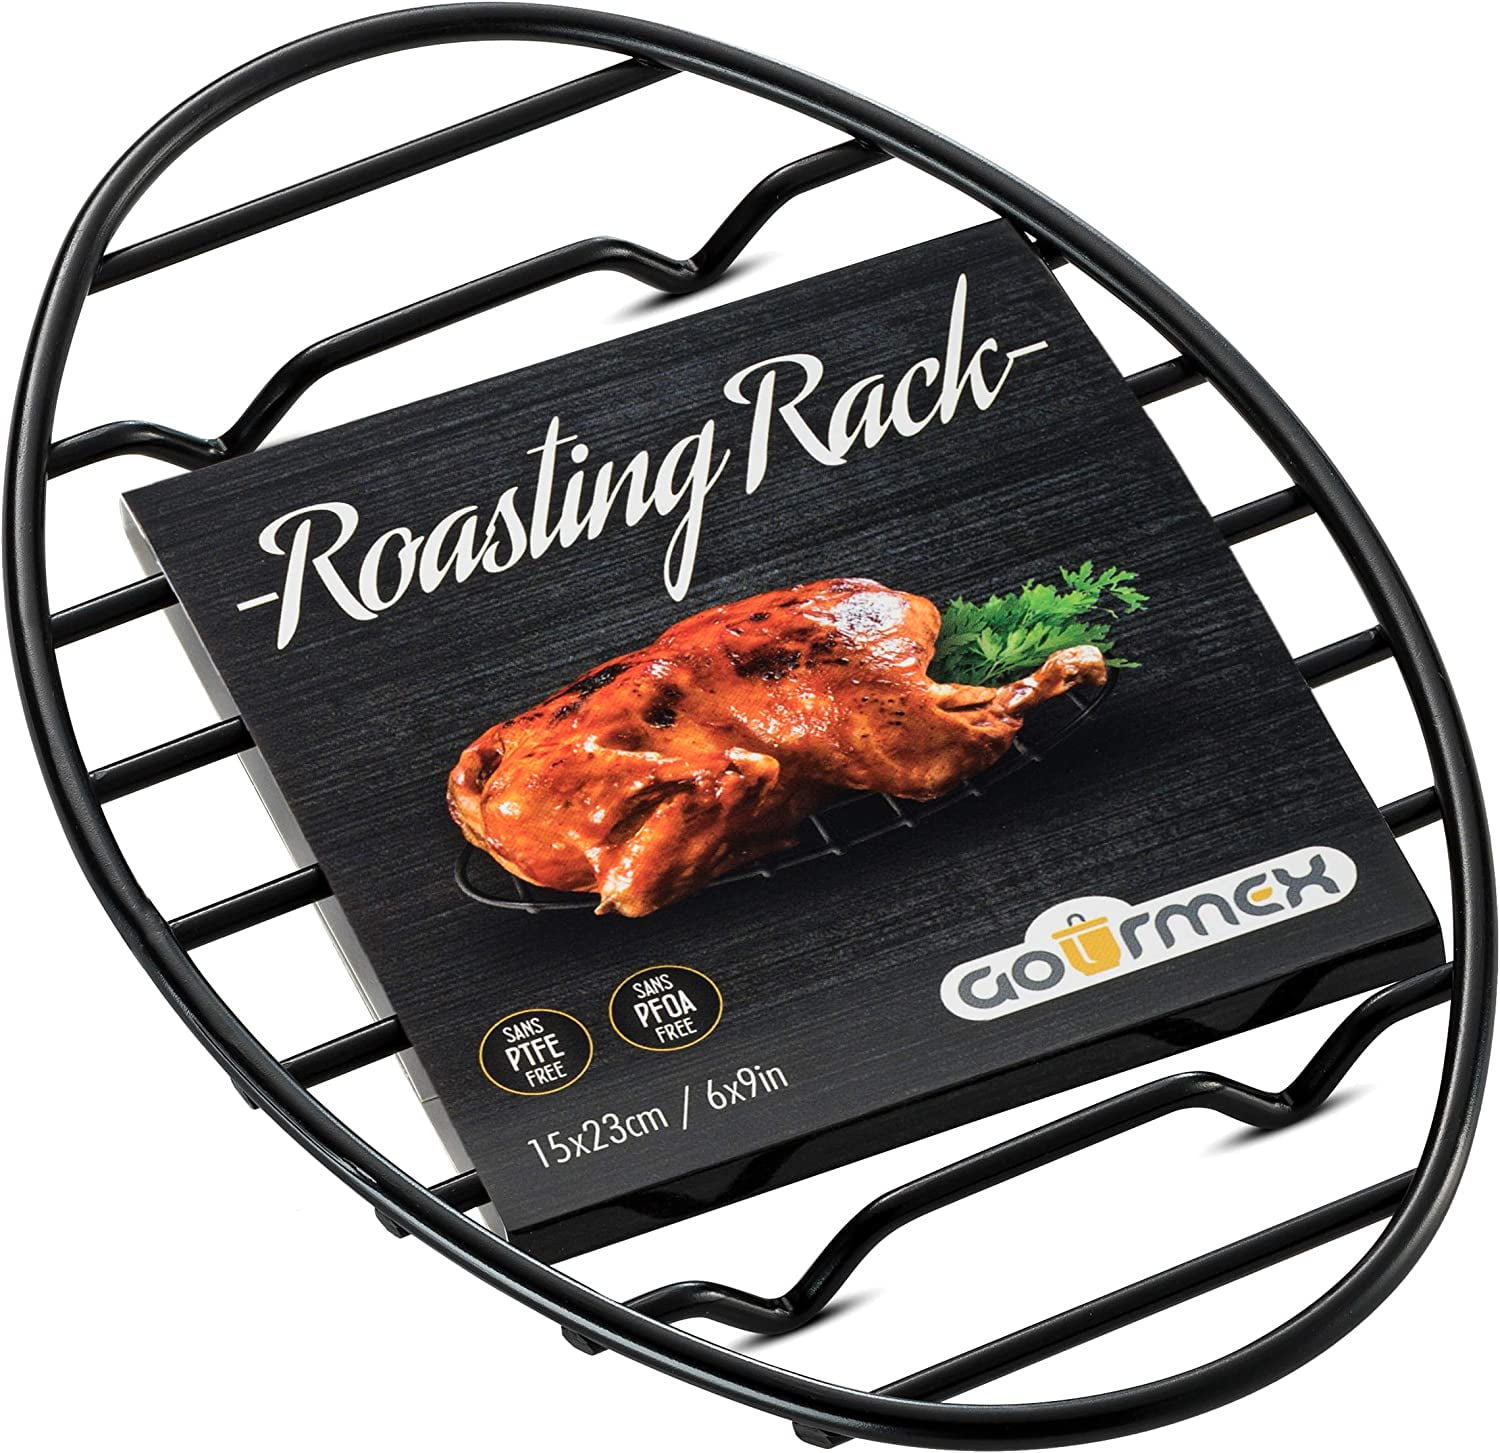 Palksky Oval Roasting Rack for 14”-19” Oval Roaster Pan/Roaster Oven,  12x8.5 Inch Non-Stick Roasting Rack Black with Integrated Feet, Oven and